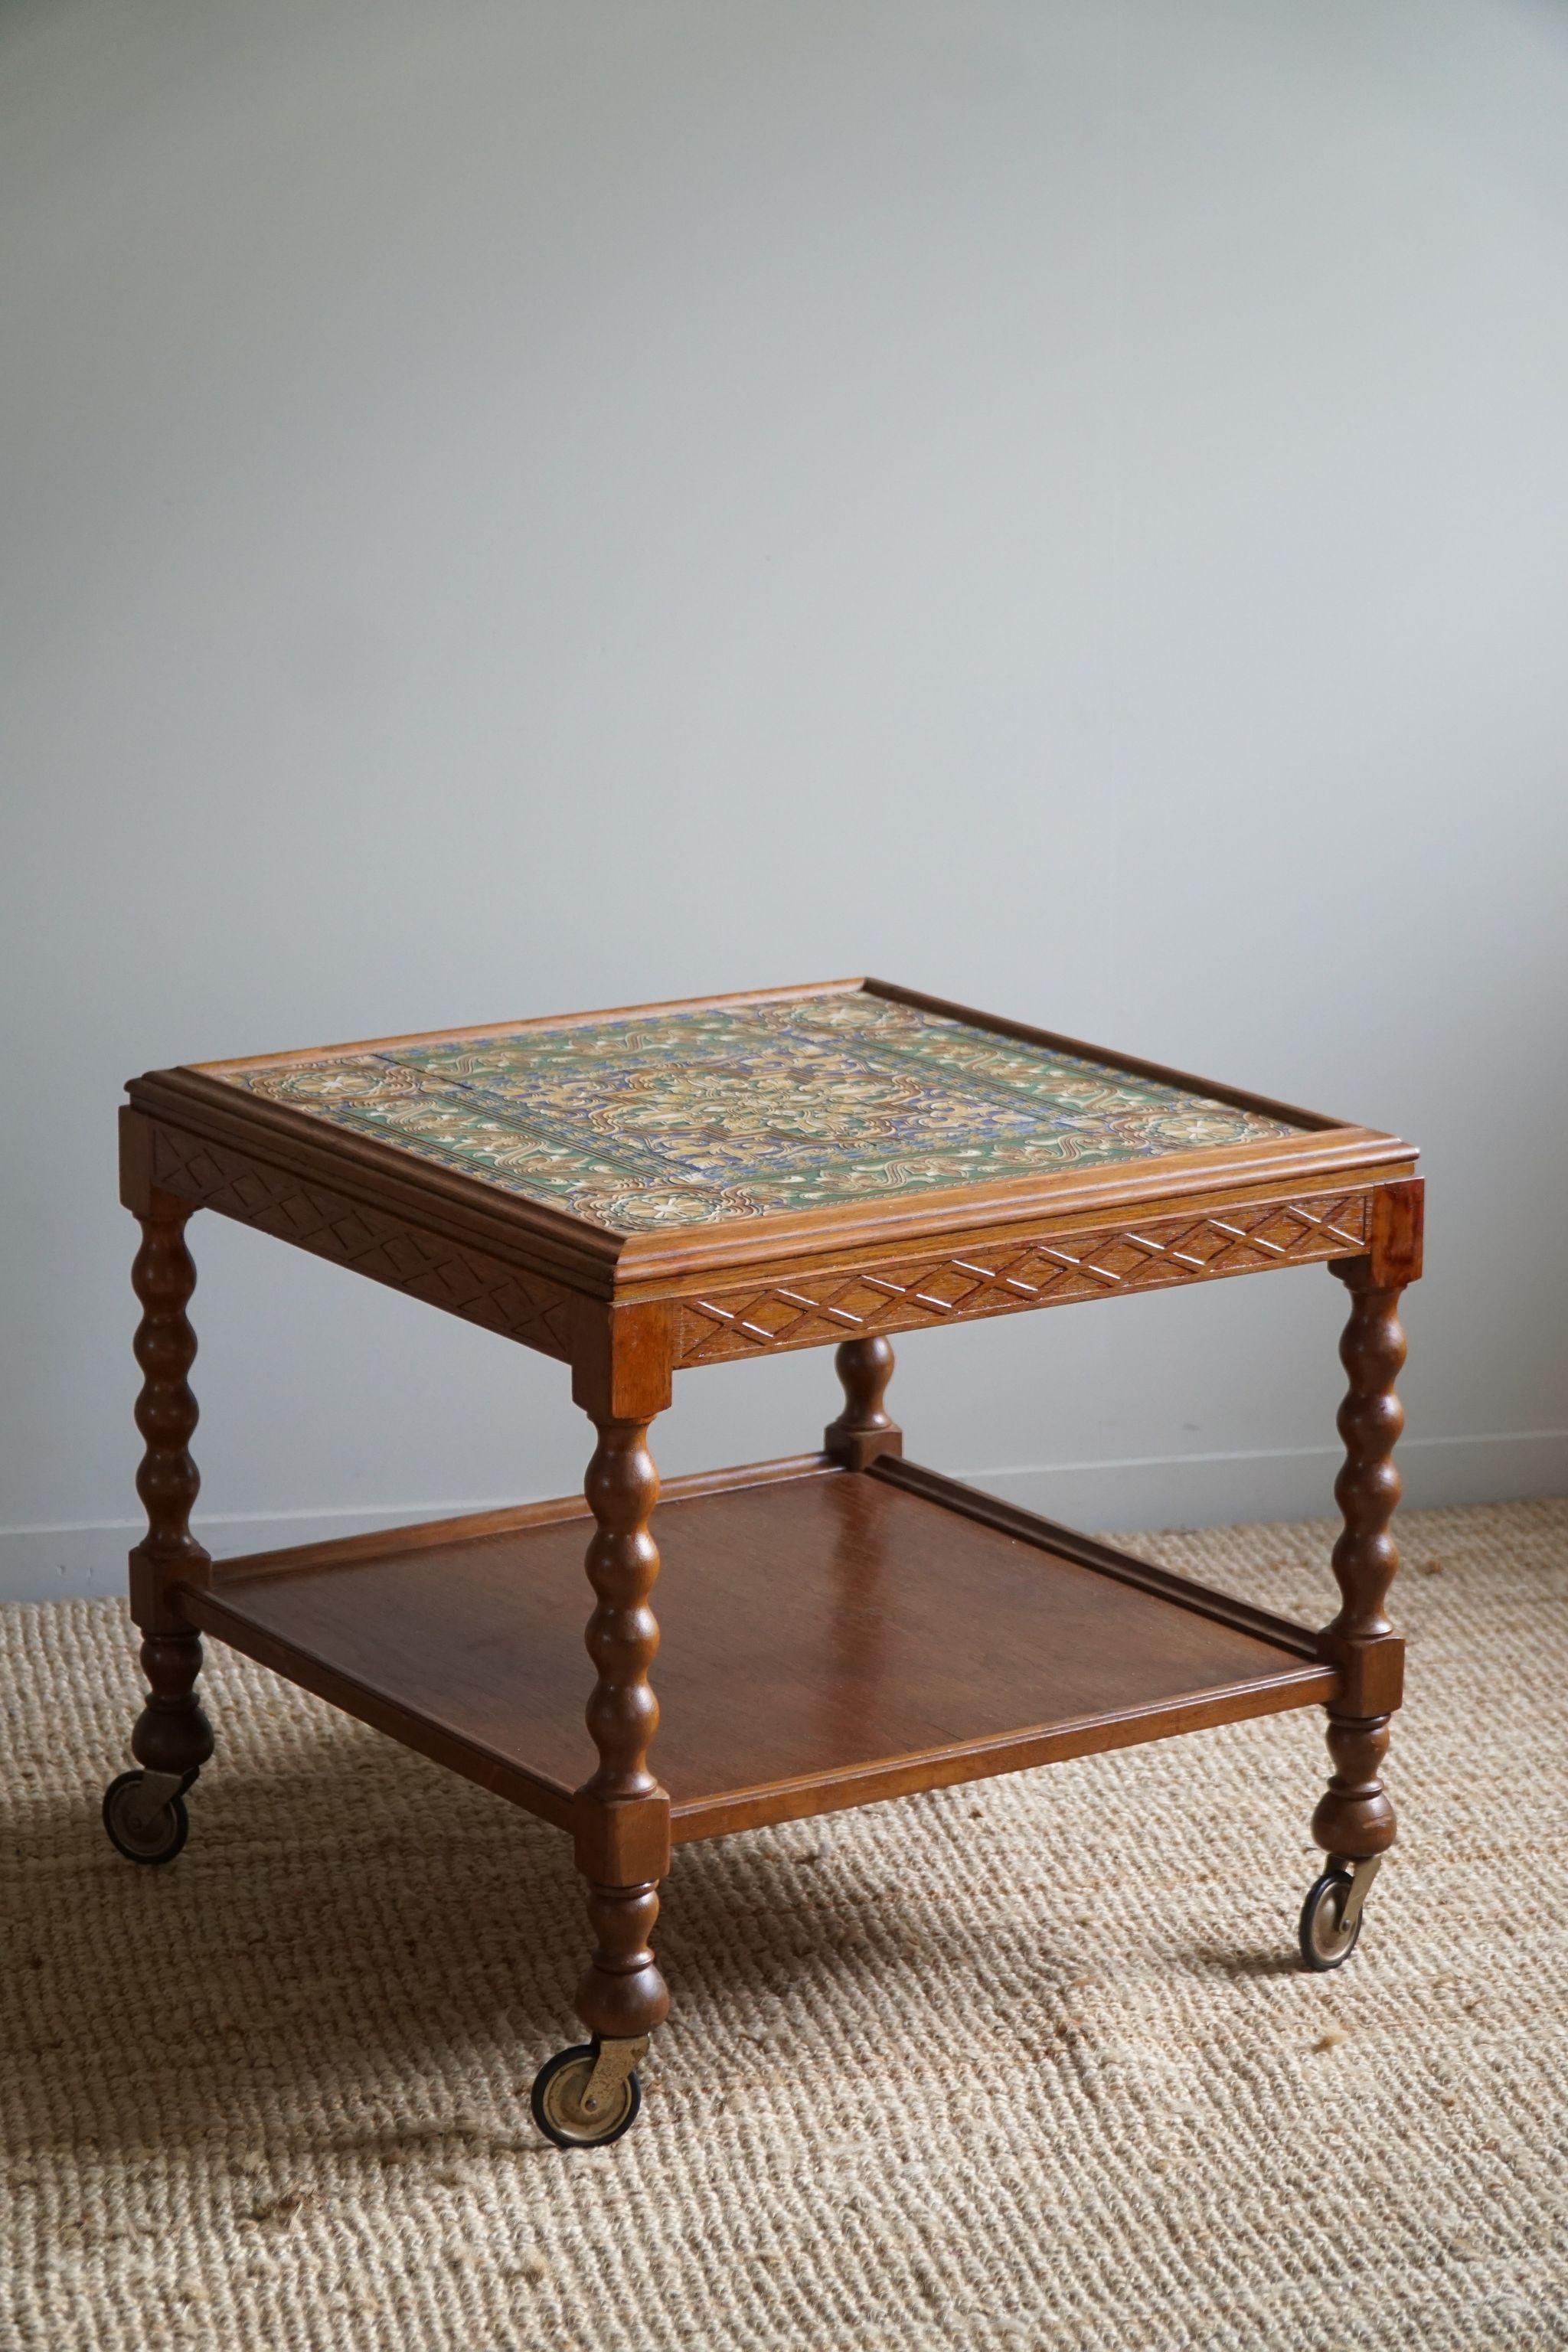 Danish Modern, Serving Table With Bobbin Turned Legs & Colorful Tiles, 1950s For Sale 4